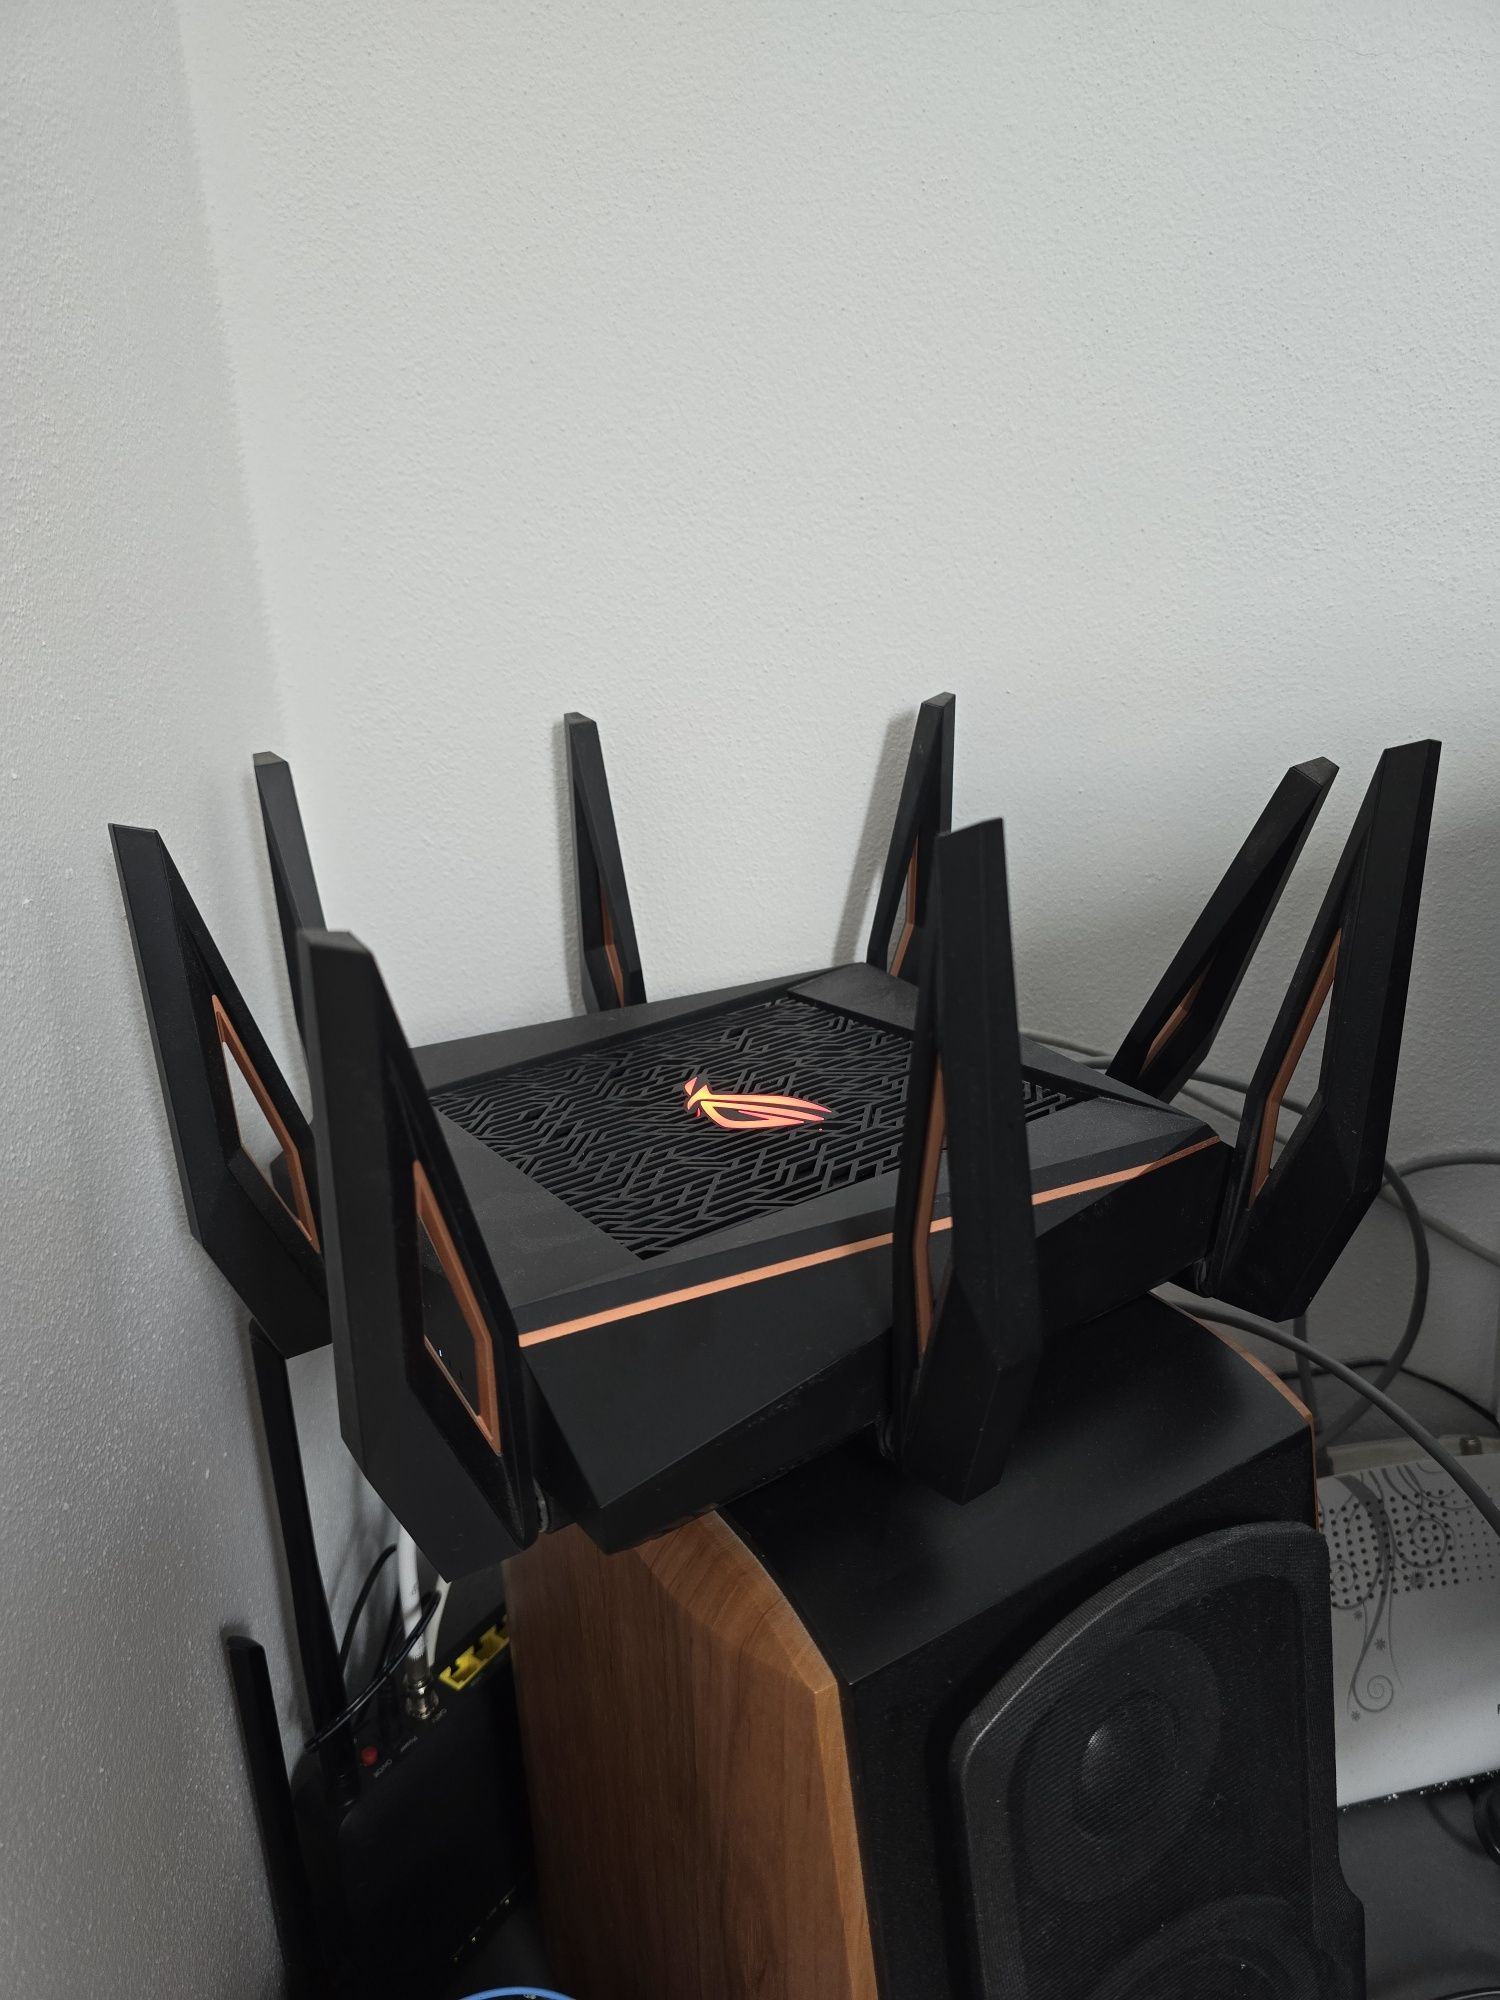 Router Gaming ASUS ROG Rapture GT-AX11000